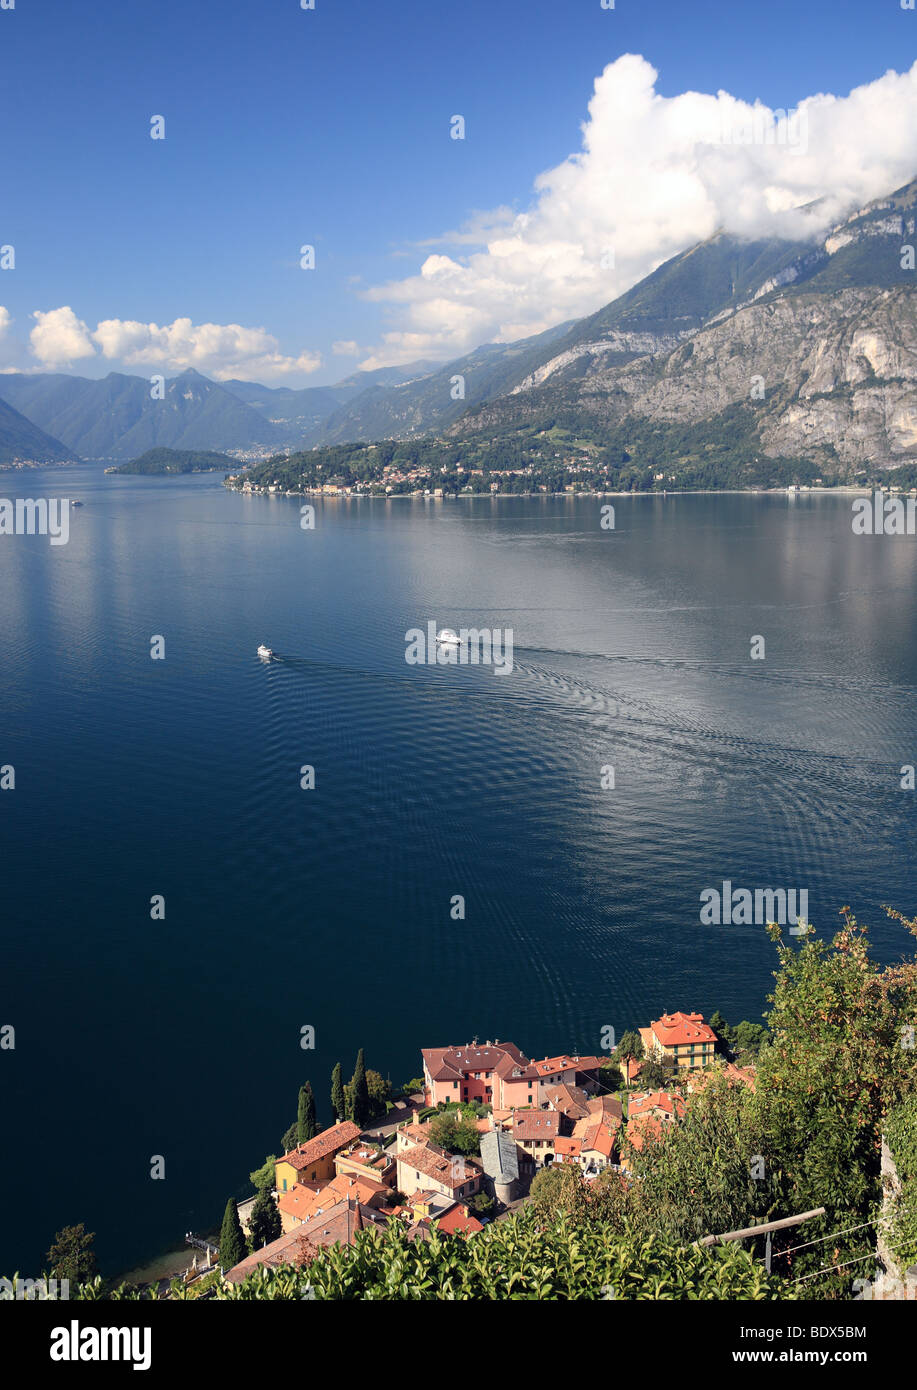 The Italian town of Varenna seen from the village of Vezio, with two ferries crossing Lake Como in the middle distance, Italy, Europe Stock Photo